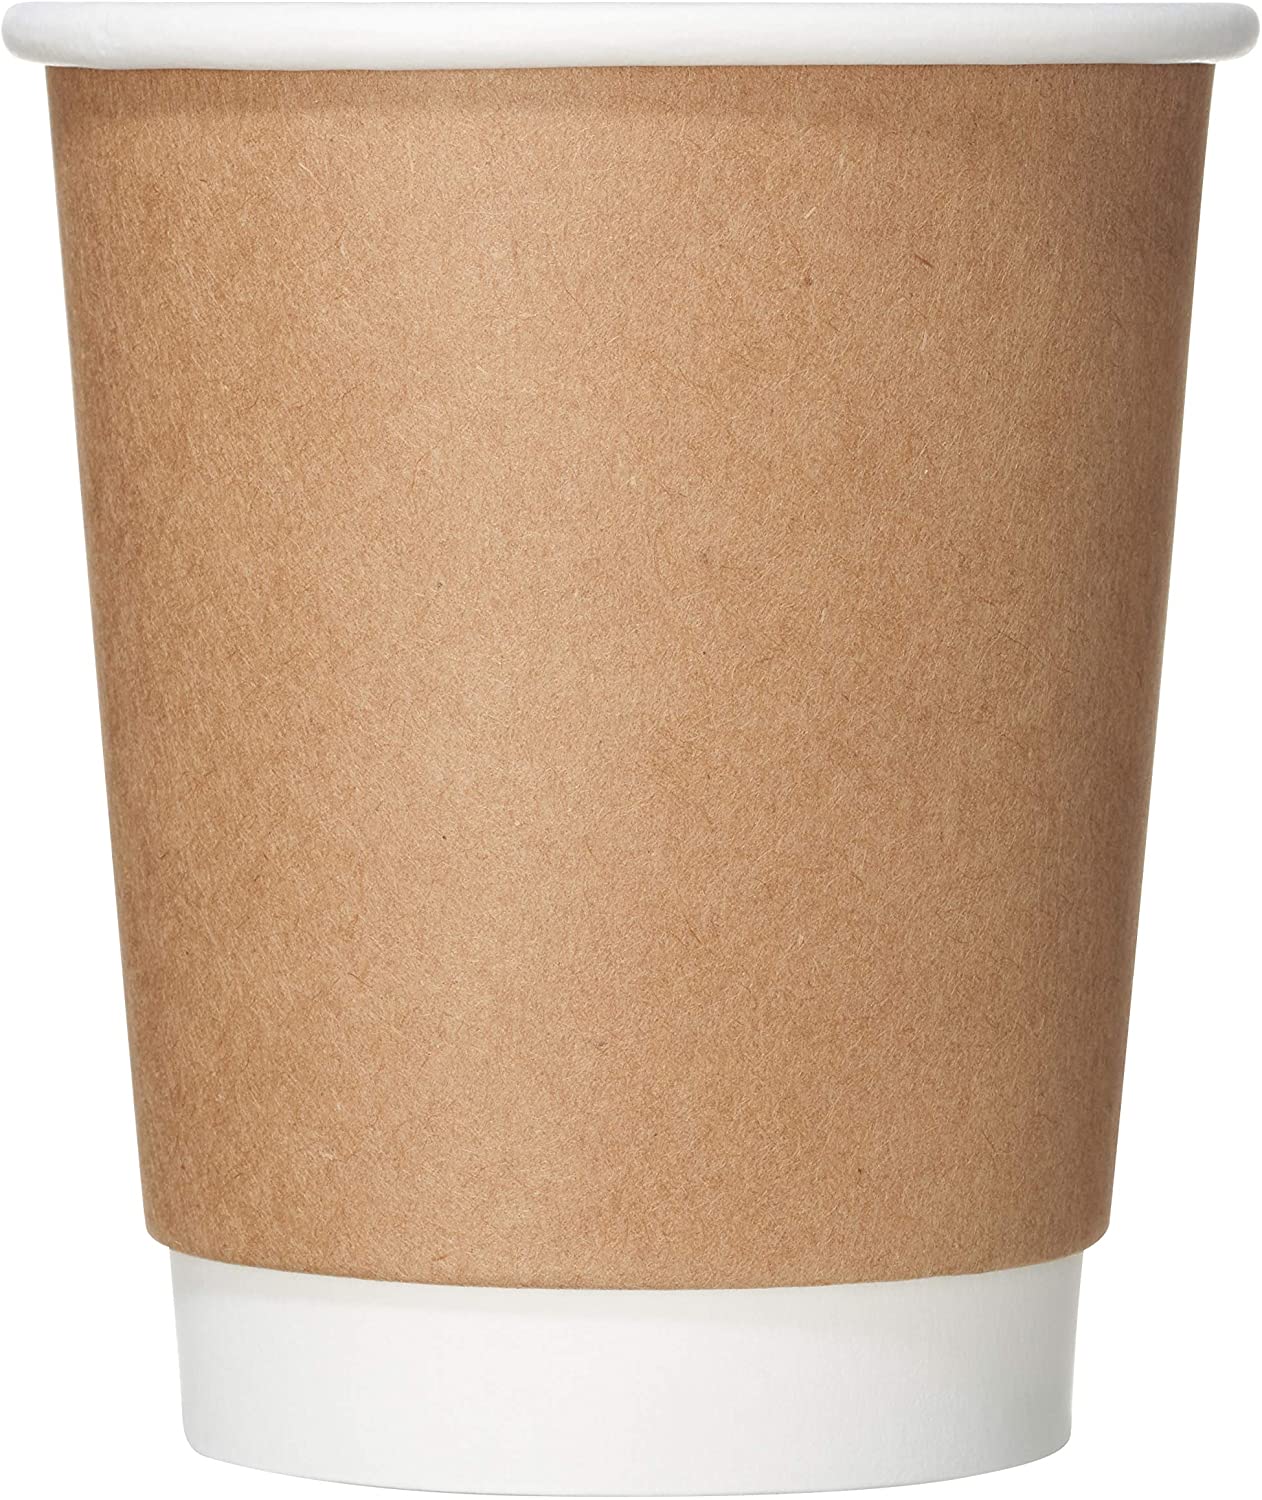 Disposable Paper Hot Cups - Double Wall Paper Coffee Cups (8oz, 12oz, 16oz)